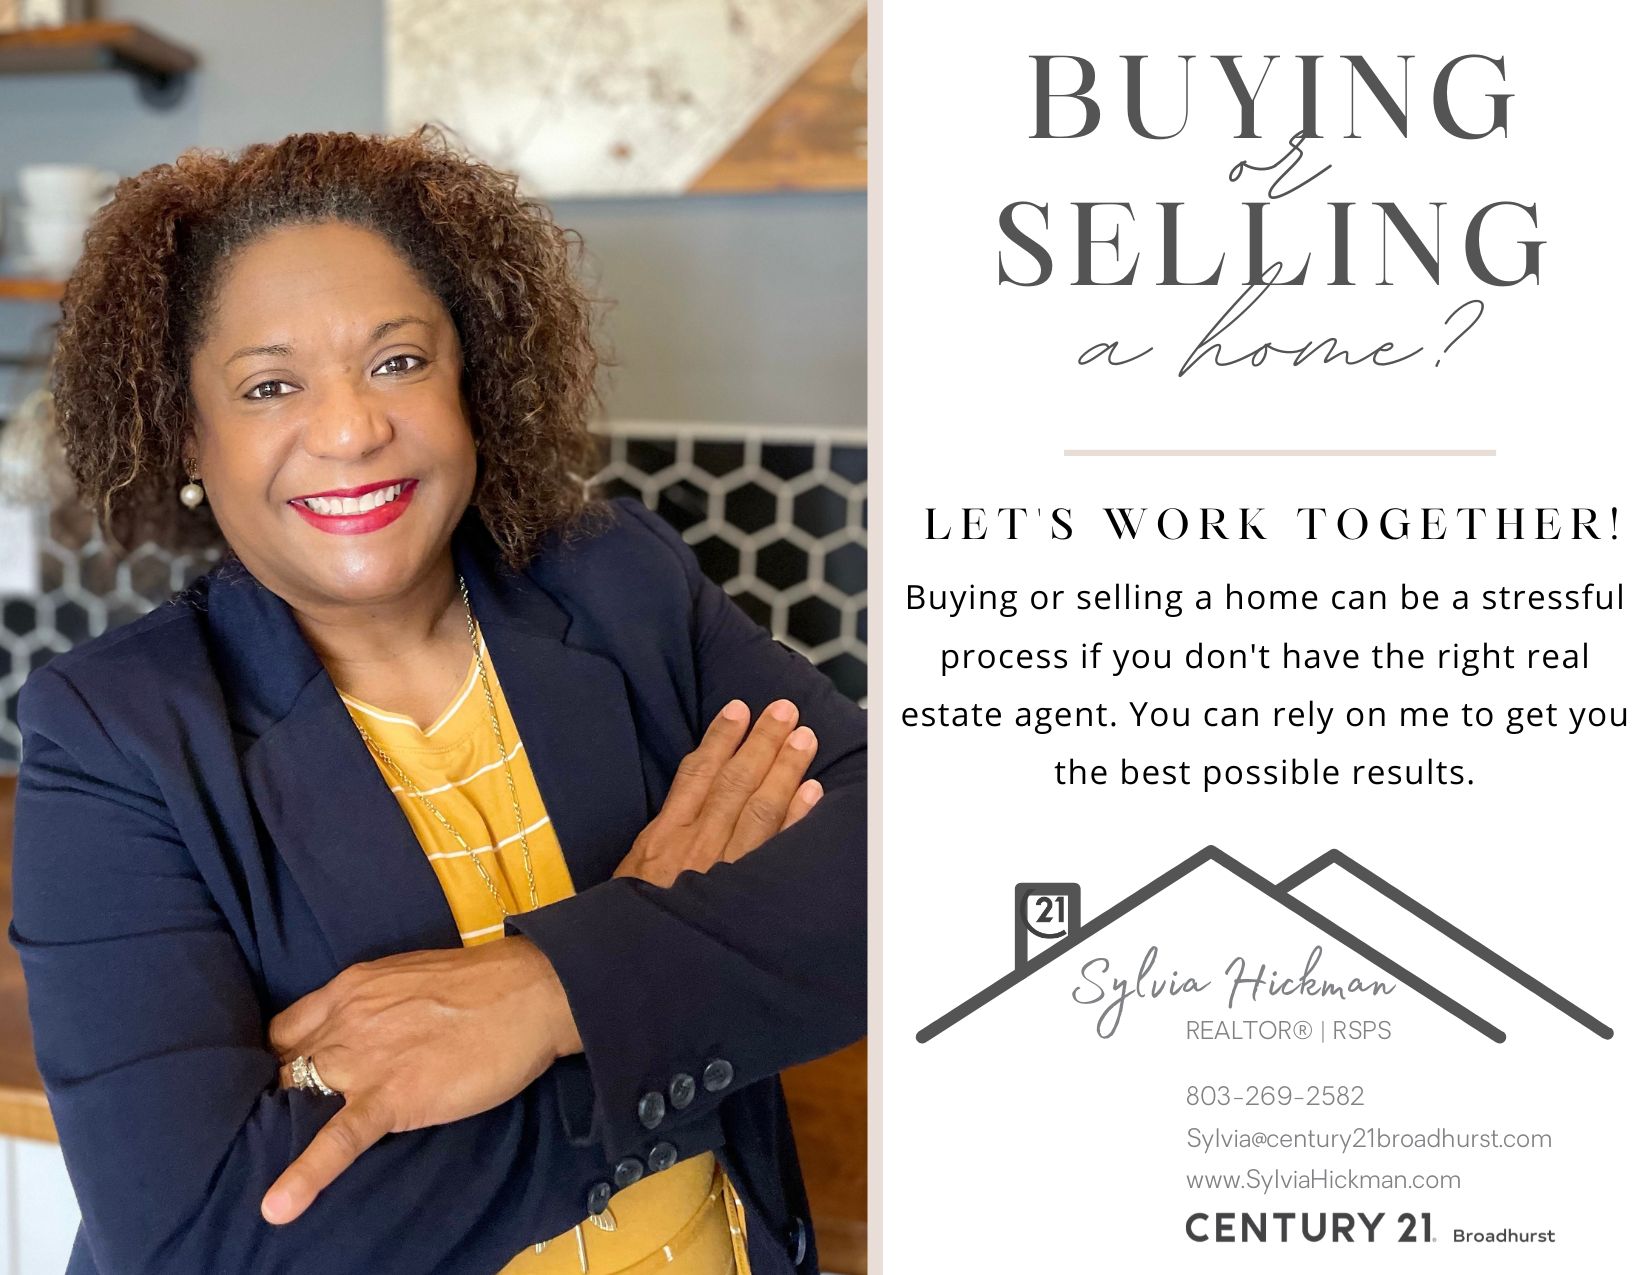 Buying or selling a home can be a stressful process if you don't have the right real estate agent. With 15 years of experience, you can rely on us to get you the best possible result. (1)